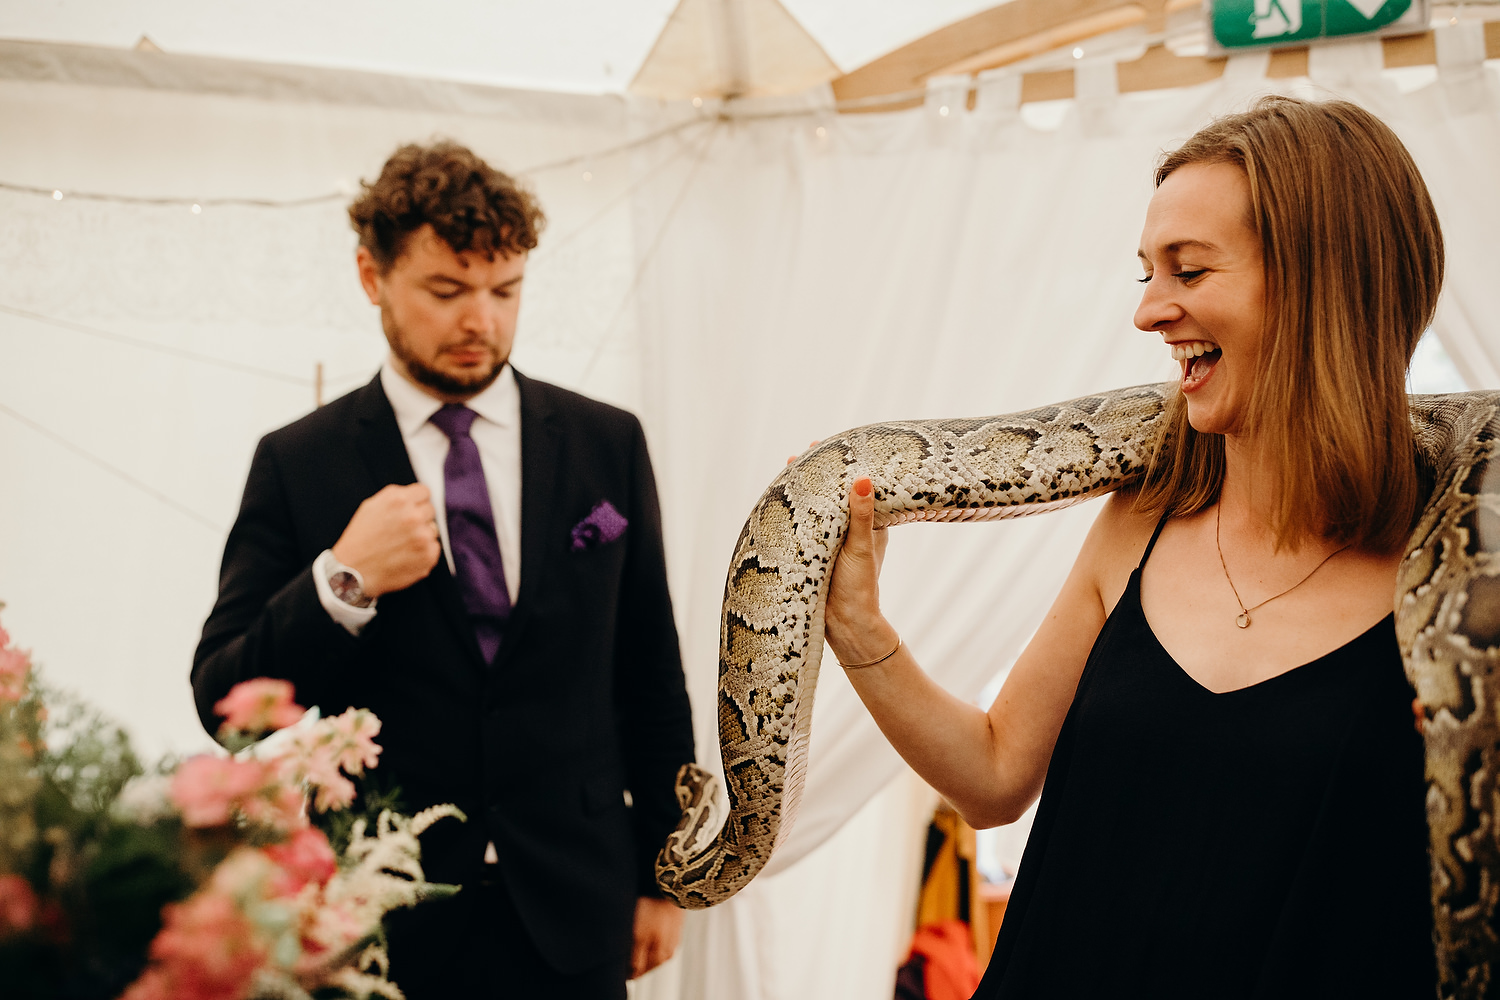 man looks scared as woman holds snake at wedding